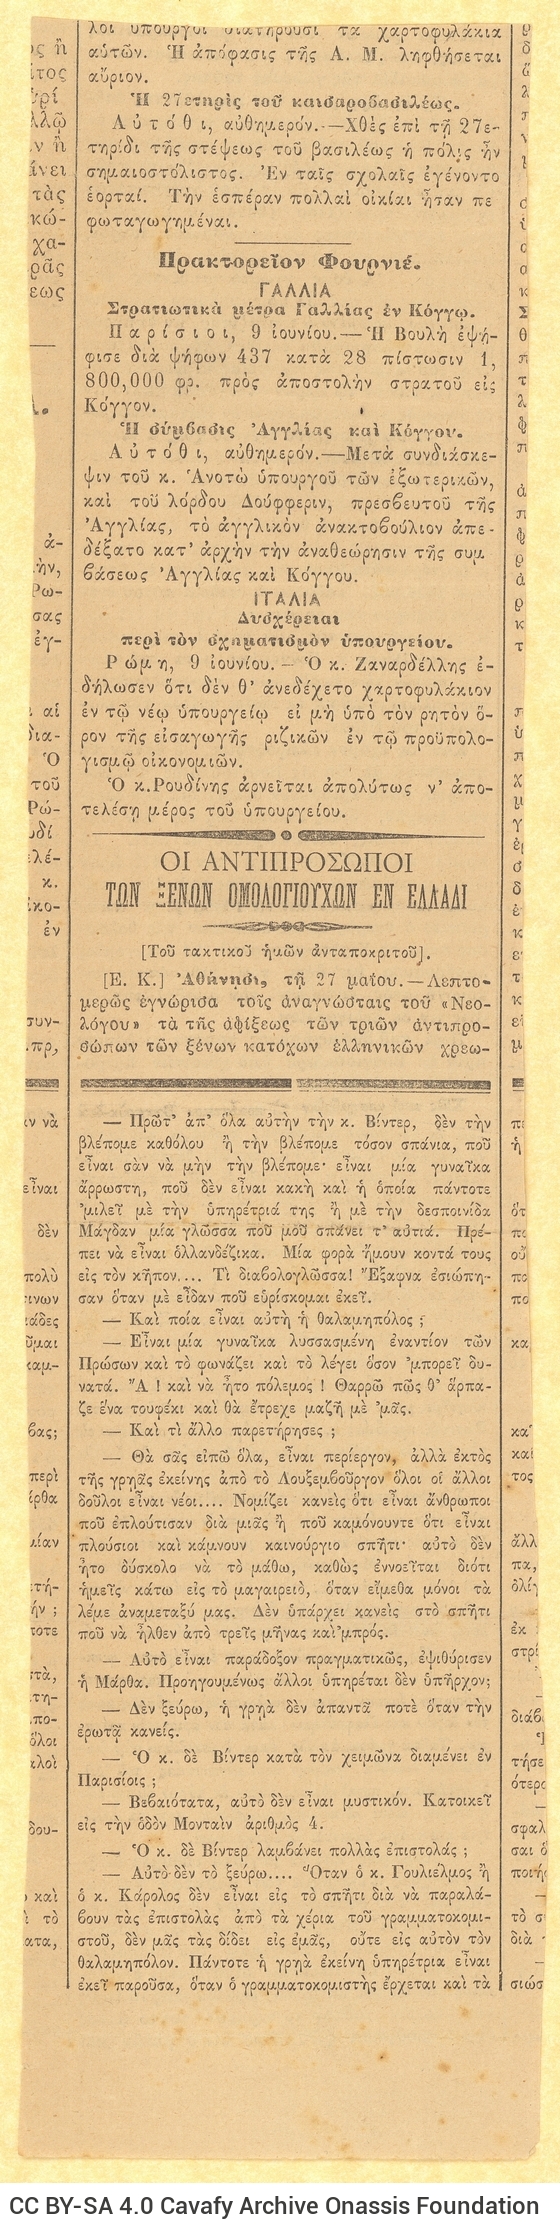 Handwritten letter by Euvoulia Fotiadi Papalamprinou to her sister, Charikleia Cavafy, on the first three pages of a bifolio.